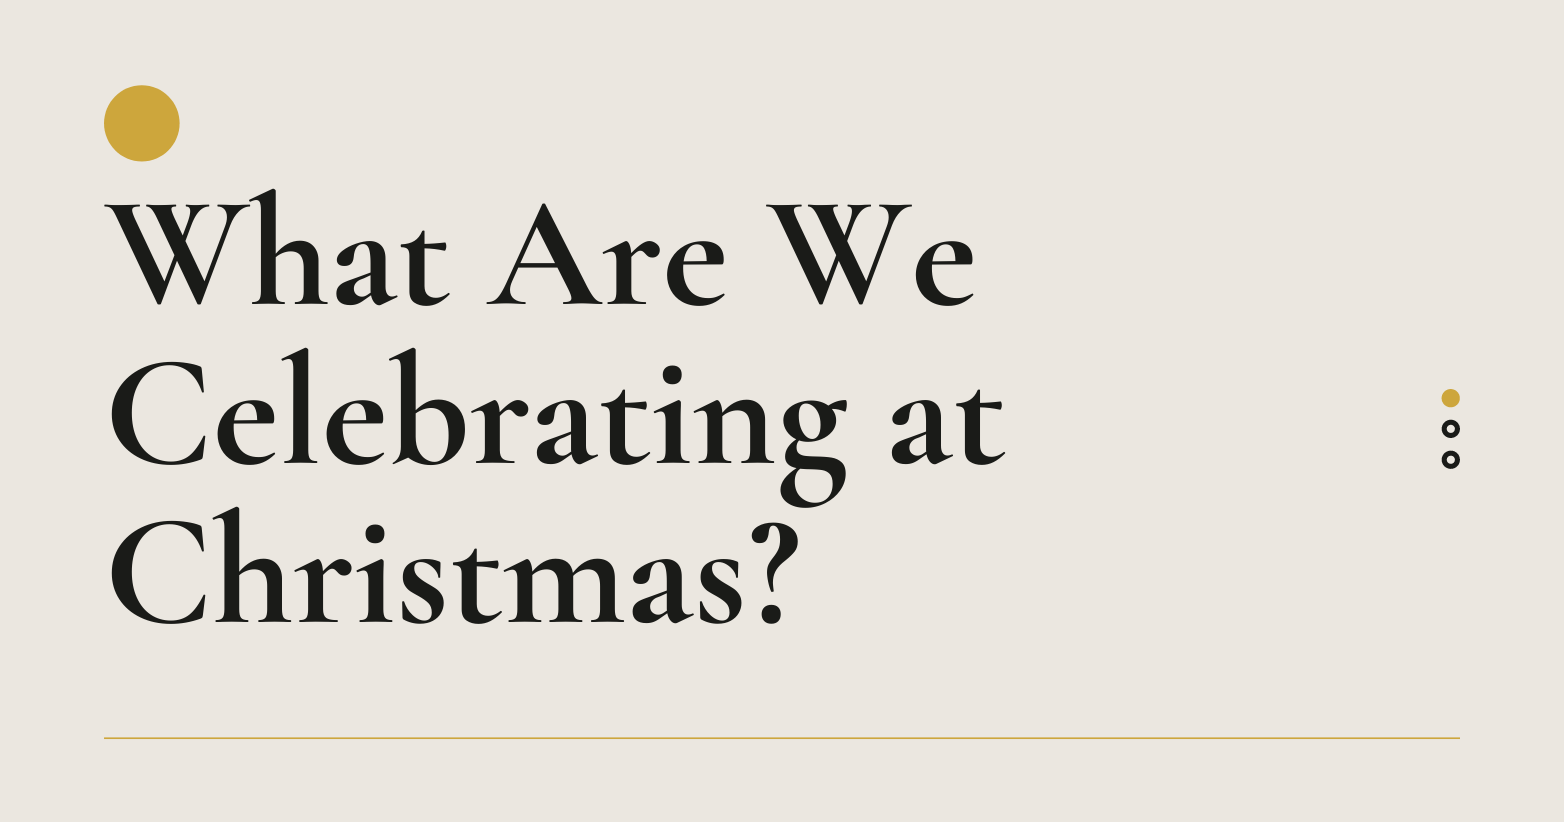 What are we celebrating at Christmas?